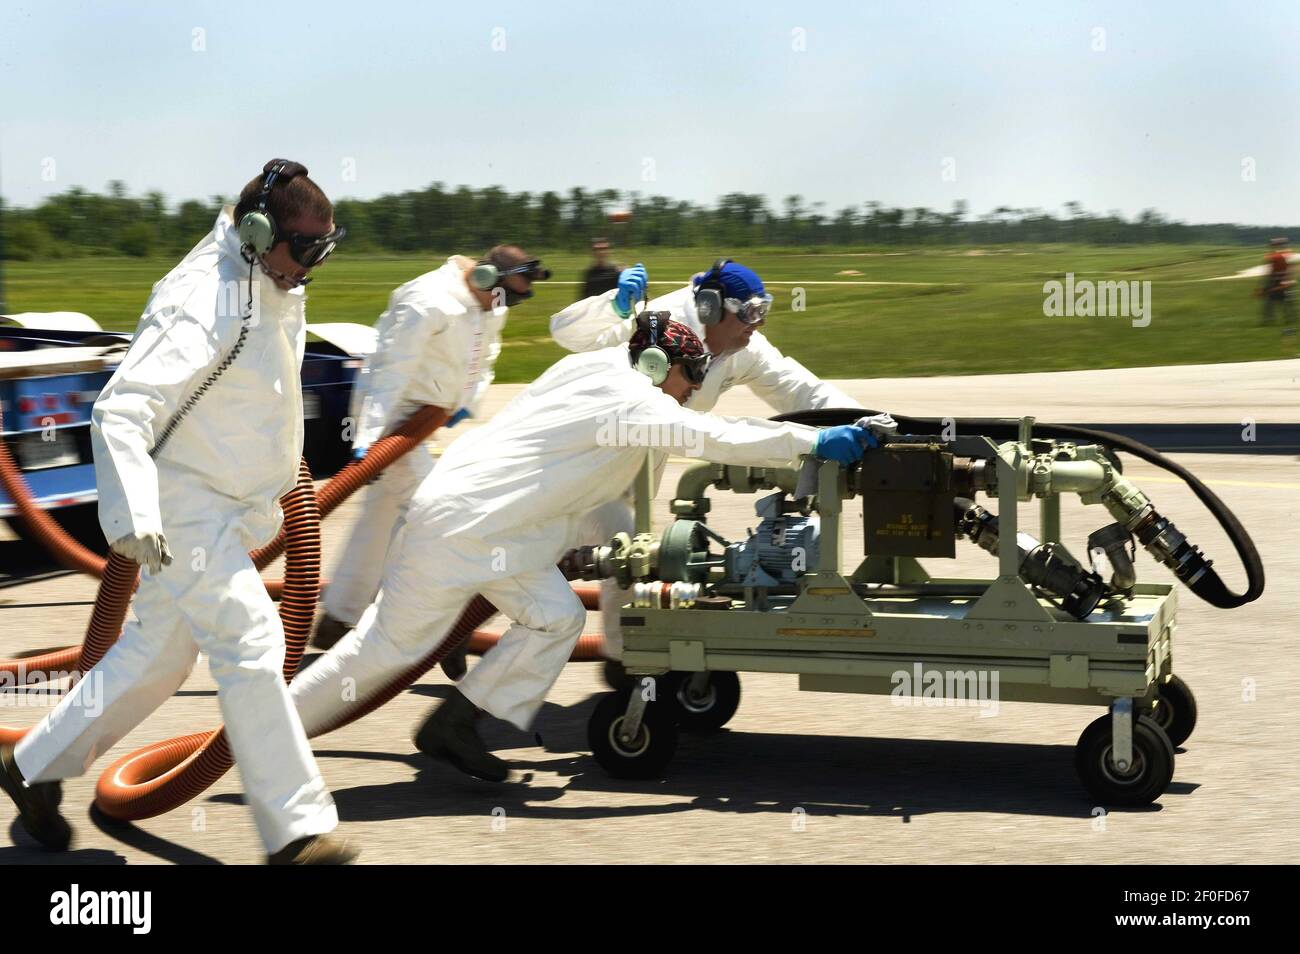 4 May 2010 - Stennis International Airport, Mississippi - A team of U.S. Air Force aerial spray aircraft maintainers from the 910th Aircraft Maintenance Squadron at Youngstown-Warren Air Reserve Station, Ohio, move a chemical pump into position in order to refill a chemical dispersing C-130 aircraft at Stennis International Airport in Kiln, Miss. on May 4, 2010. Members of the 910th Airlift Wing were in Mississippi to help with the oil spill clean up. The 910th AW specializes in aerial spray and is the Department of DefenseÃ•s only large area fixed wing aerial spray unit. Photo Credit: Adrian  Stock Photo